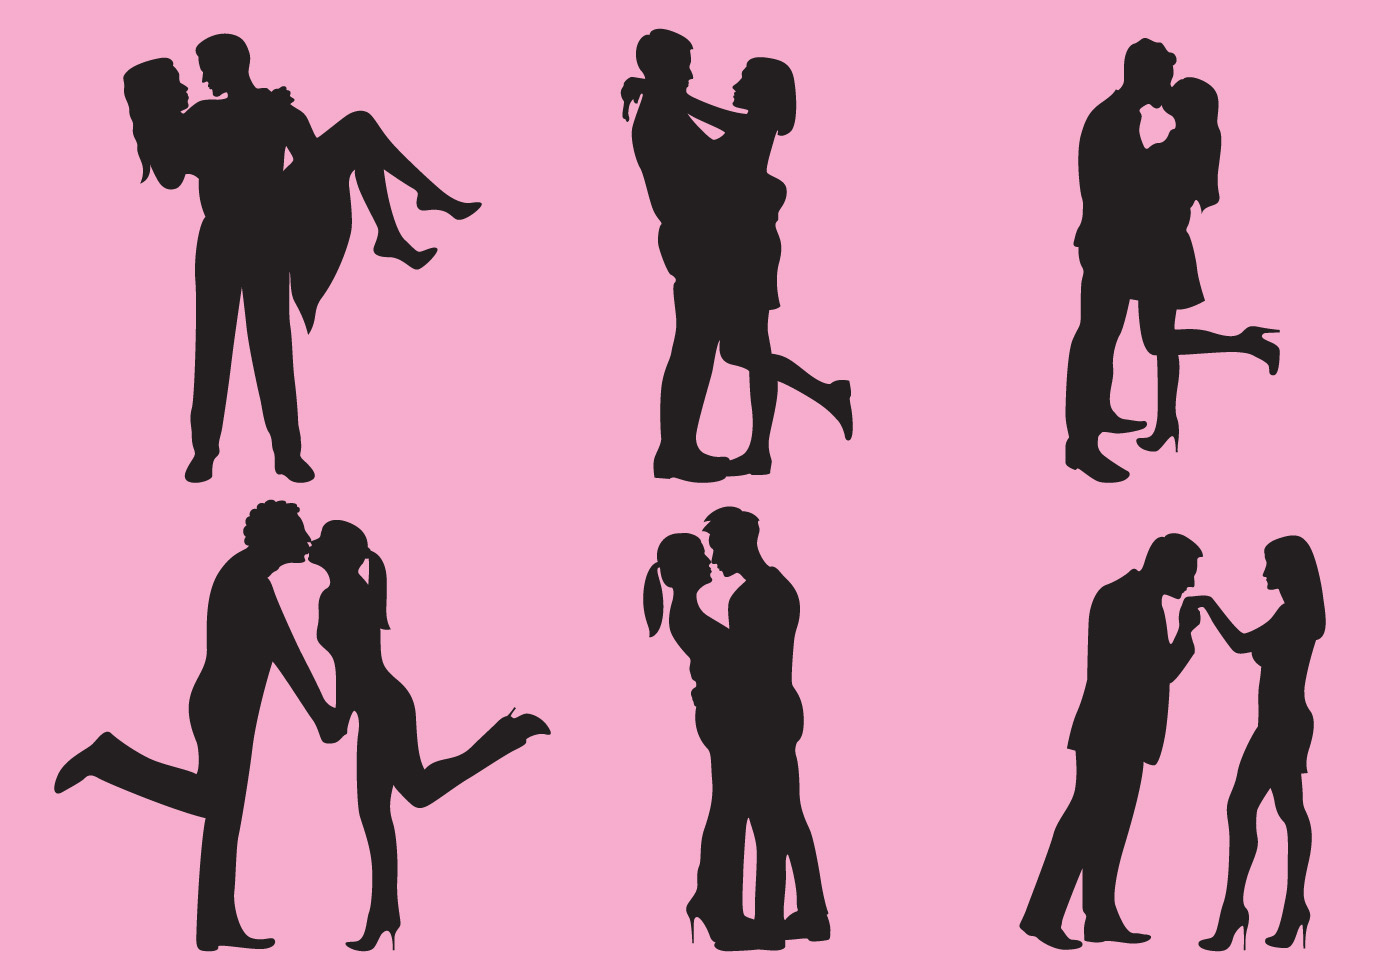 Download Woman And Man Love Silhouettes - Download Free Vectors ...